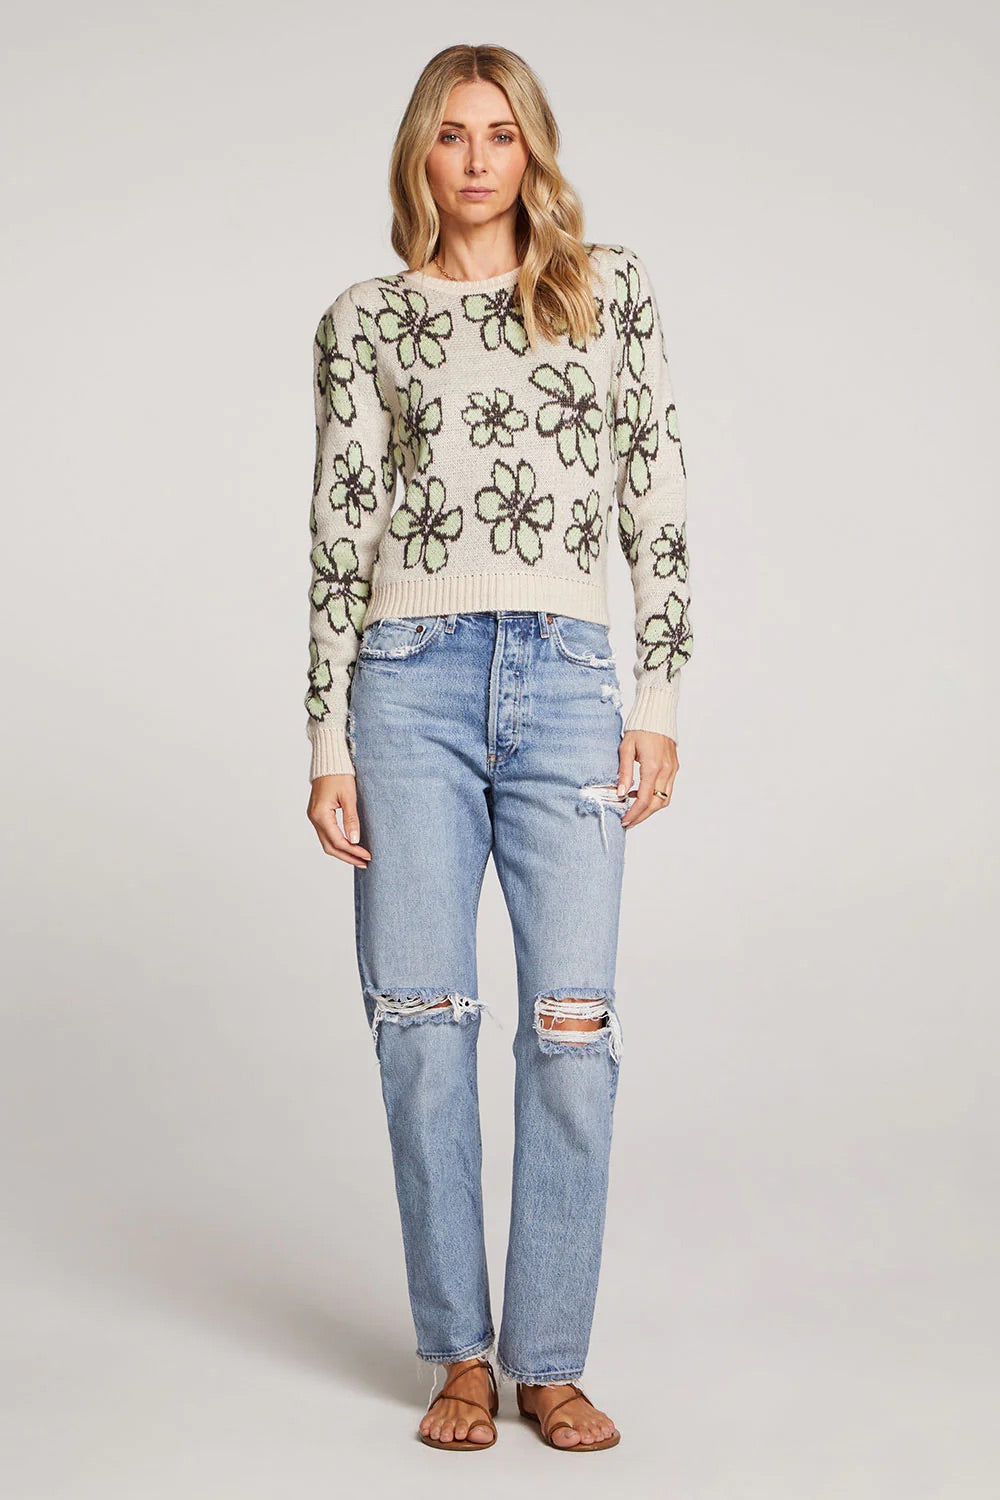 Saltwater Luxe / Glory Sweater